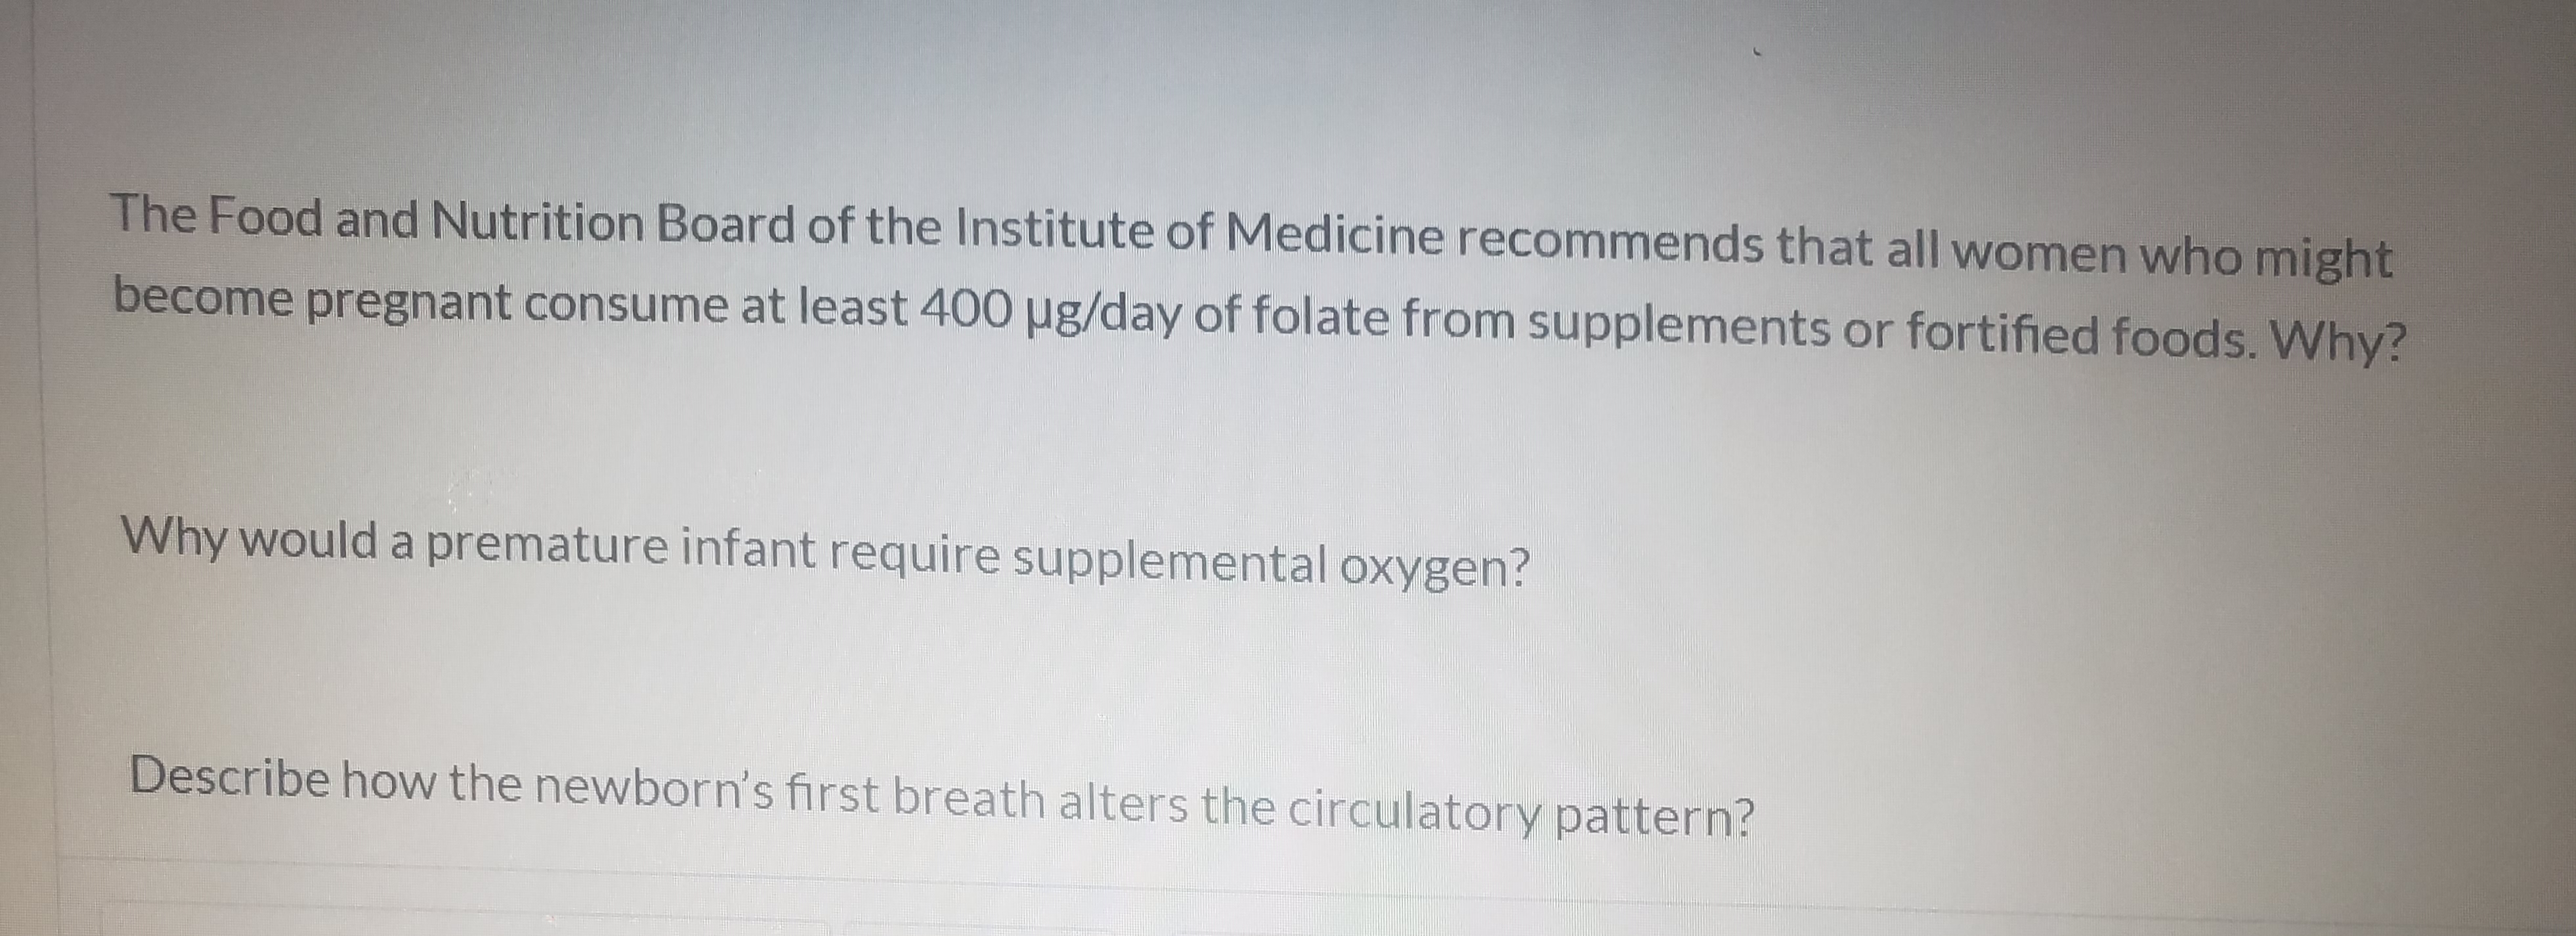 The Food and Nutrition Board of the Institute of Medicine recommends that all women who might
become pregnant consume at least 400 µg/day of folate from supplements or fortified foods. Why?
Why would a premature infant require supplemental oxygen?
Describe how the newborn's first breath alters the circulatory pattern?
